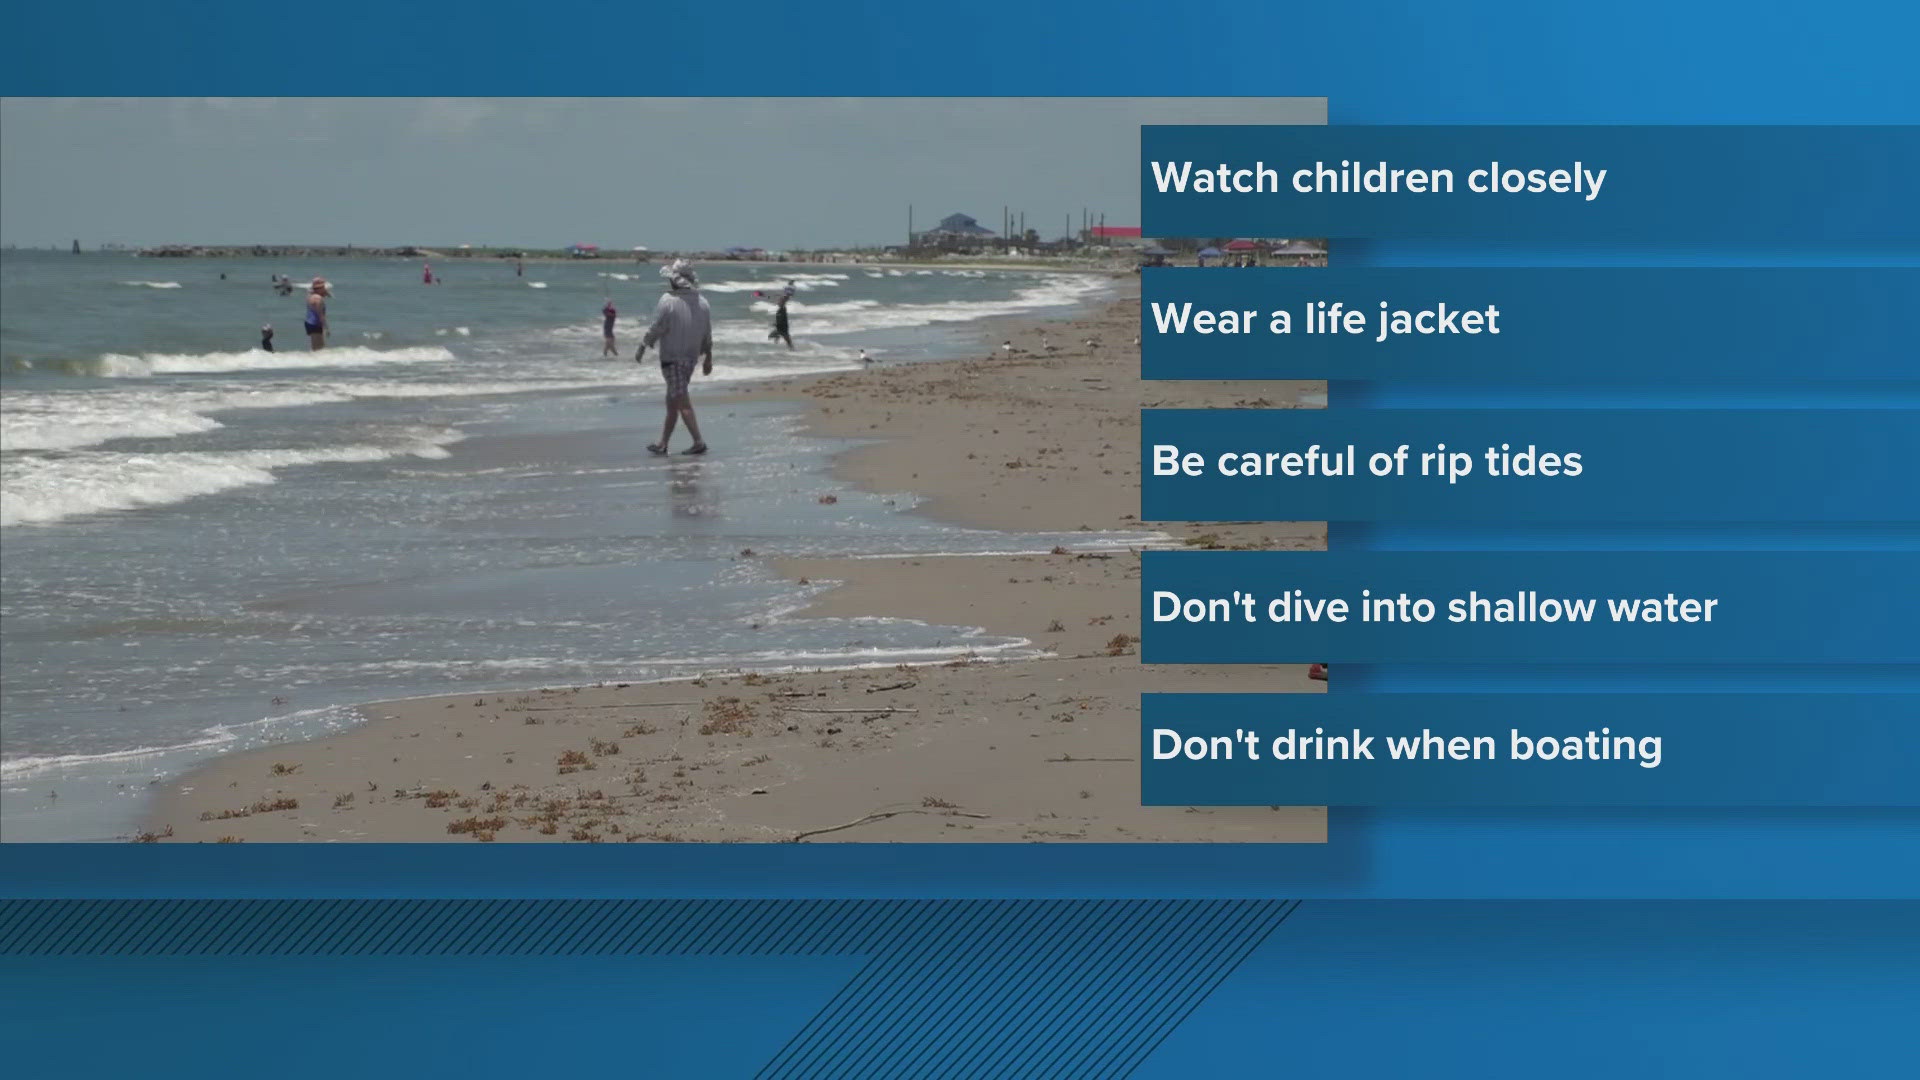 Water safety tips for the summer.